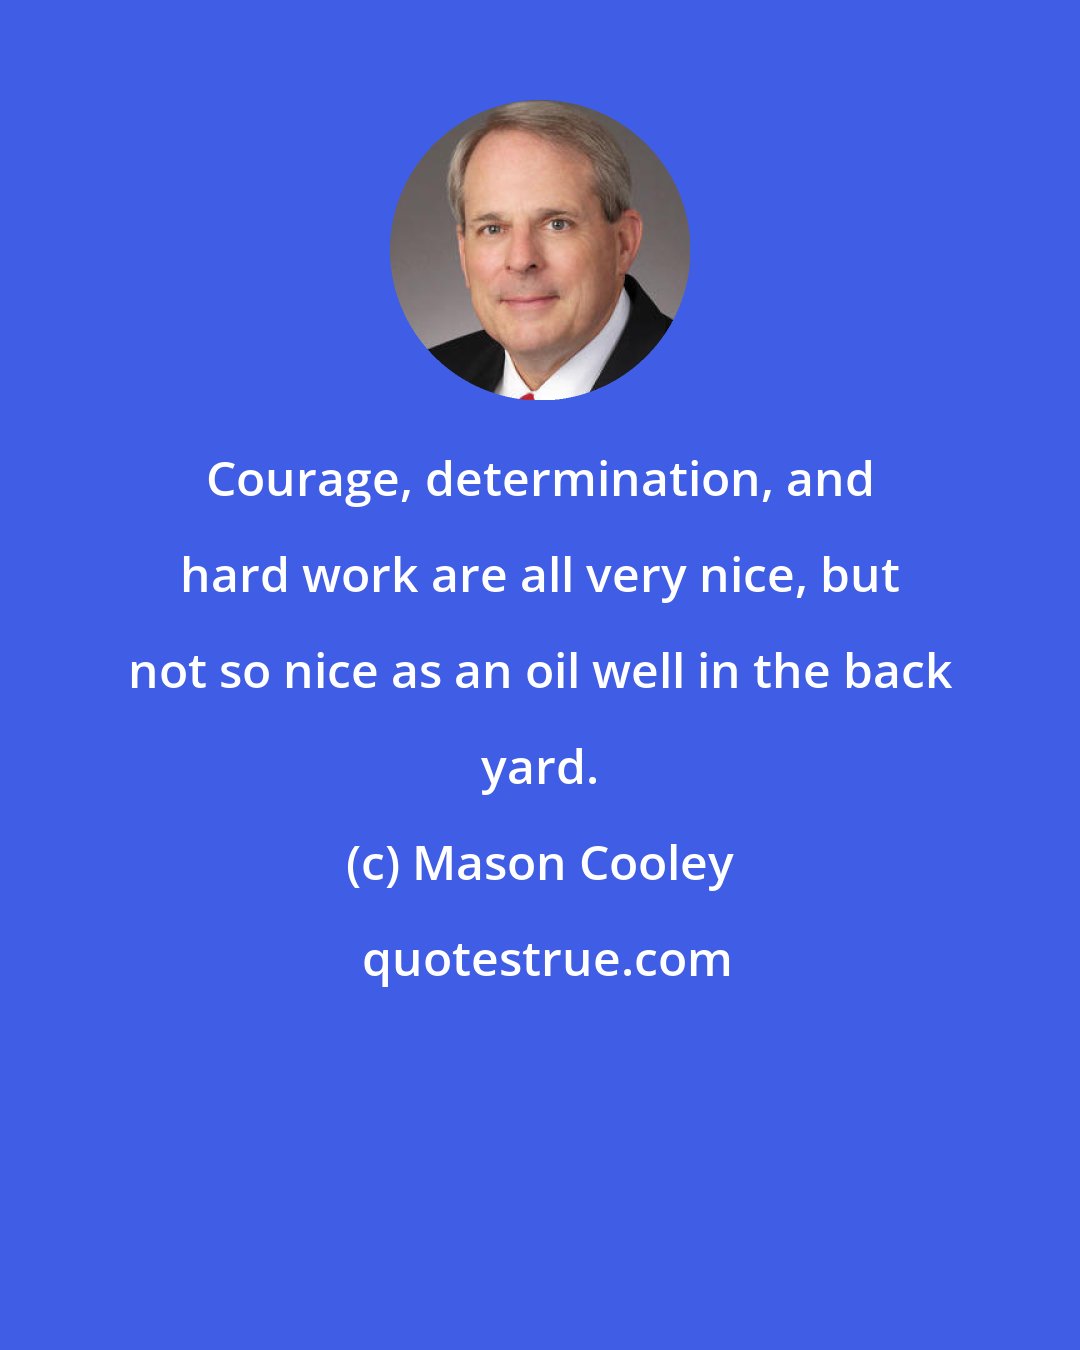 Mason Cooley: Courage, determination, and hard work are all very nice, but not so nice as an oil well in the back yard.